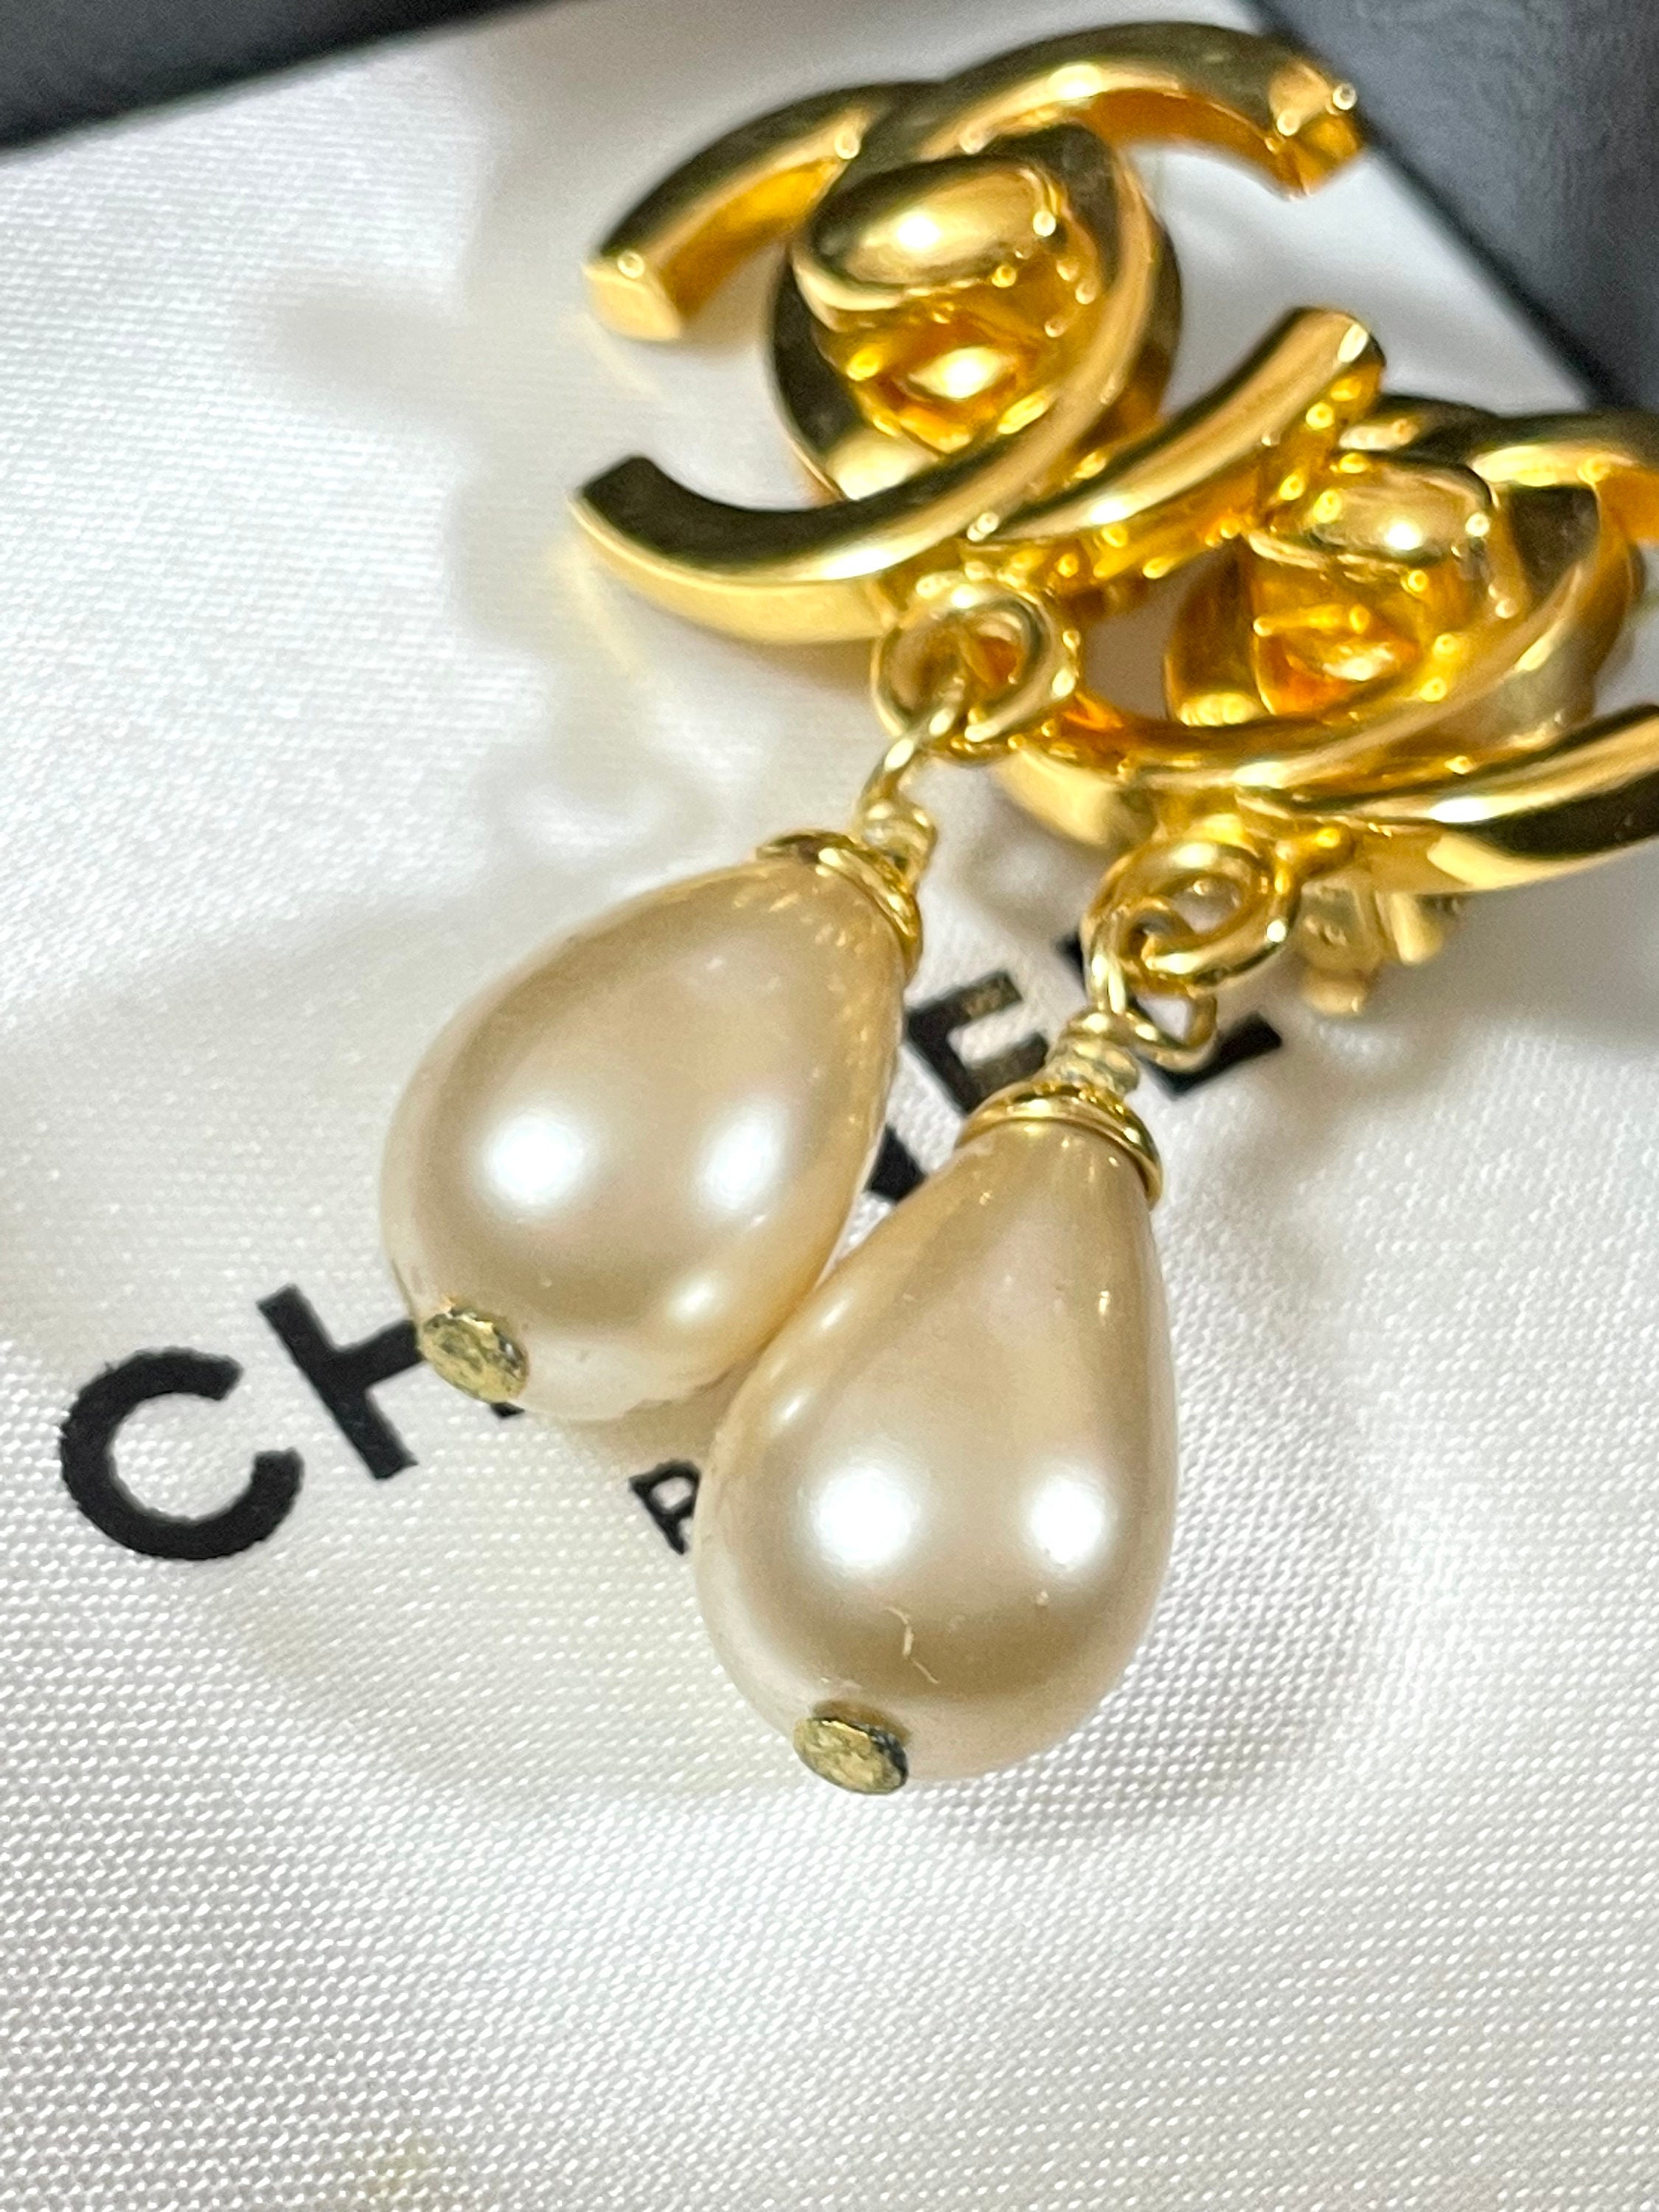 Vintage CHANEL teardrop faux pearl and turn-lock CC dangle earrings. Very  classic and popular jewelry. Coco mark earrings. 050406m1